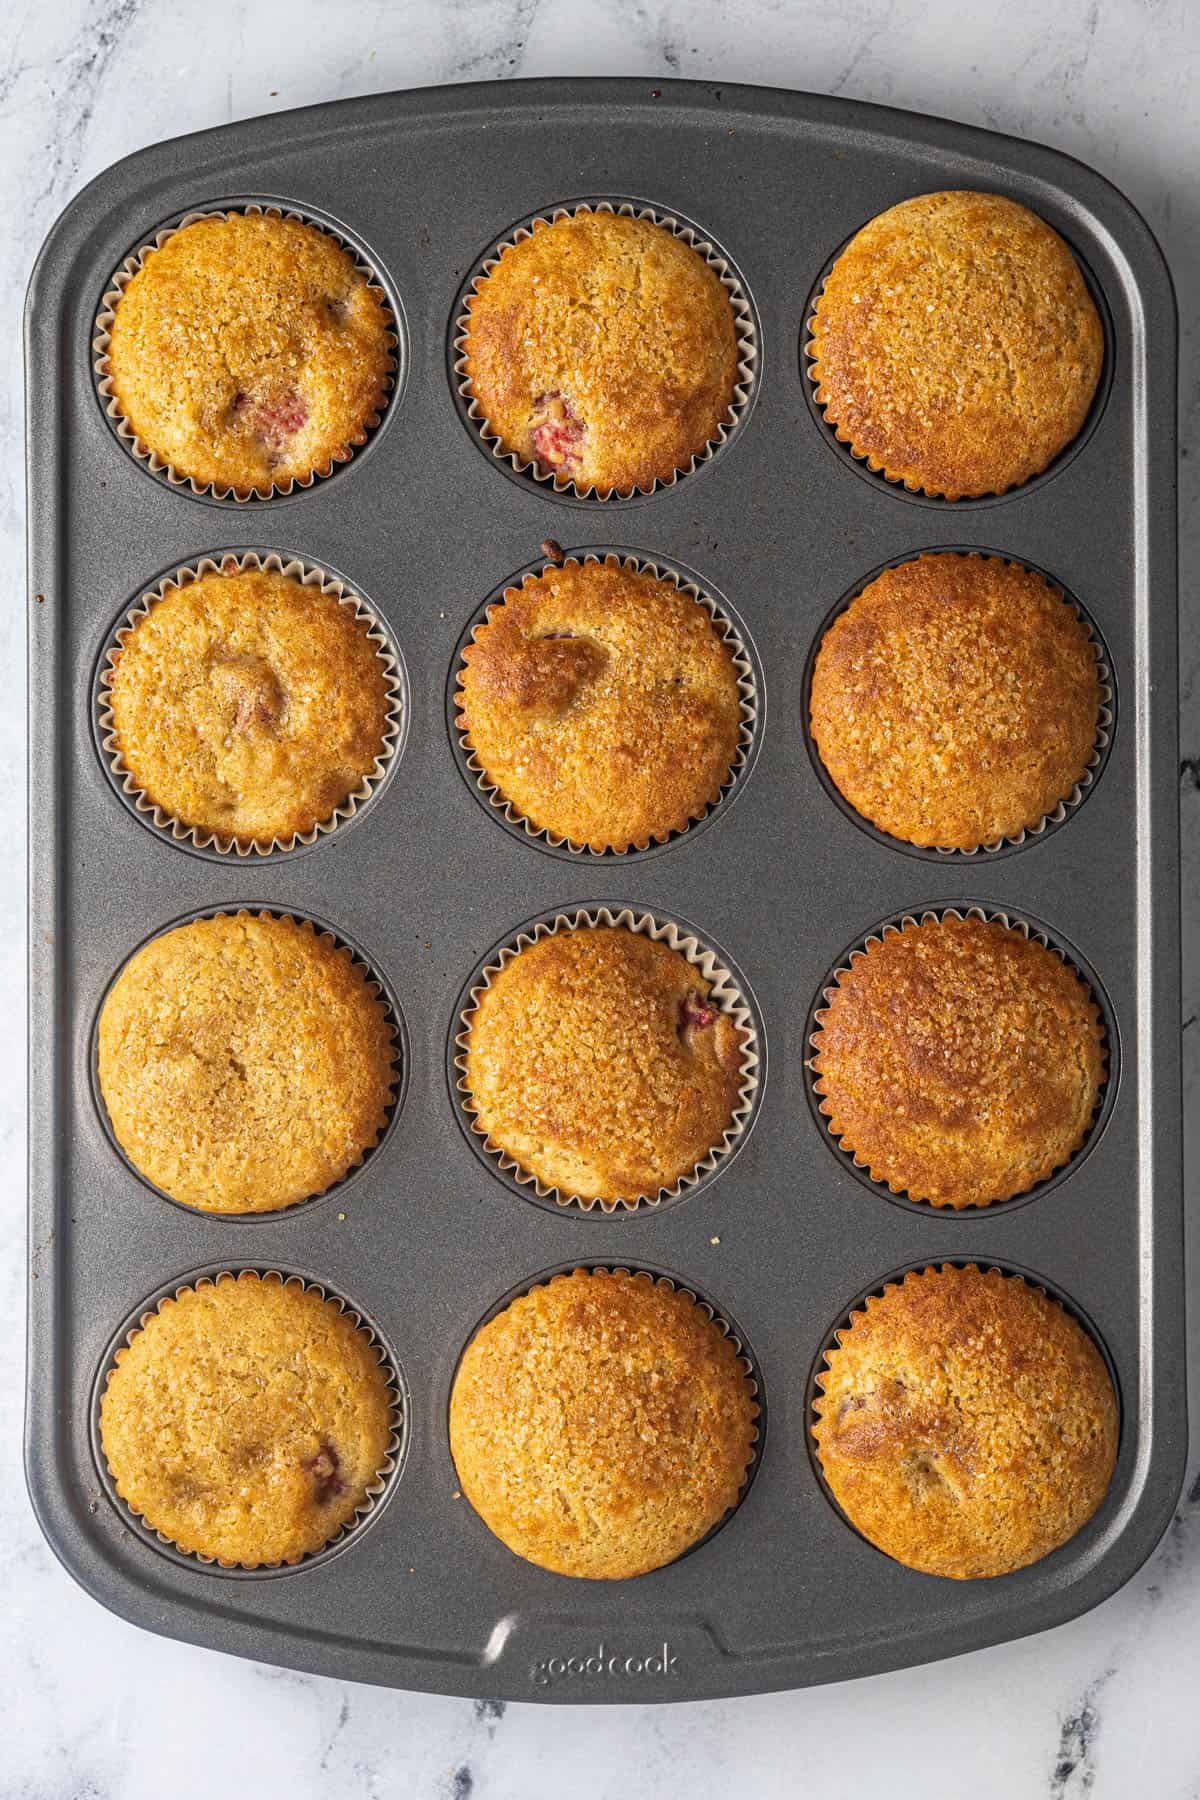 This image shows the finished Gluten Free Raspberry Muffins. They have been baked and are cooling.